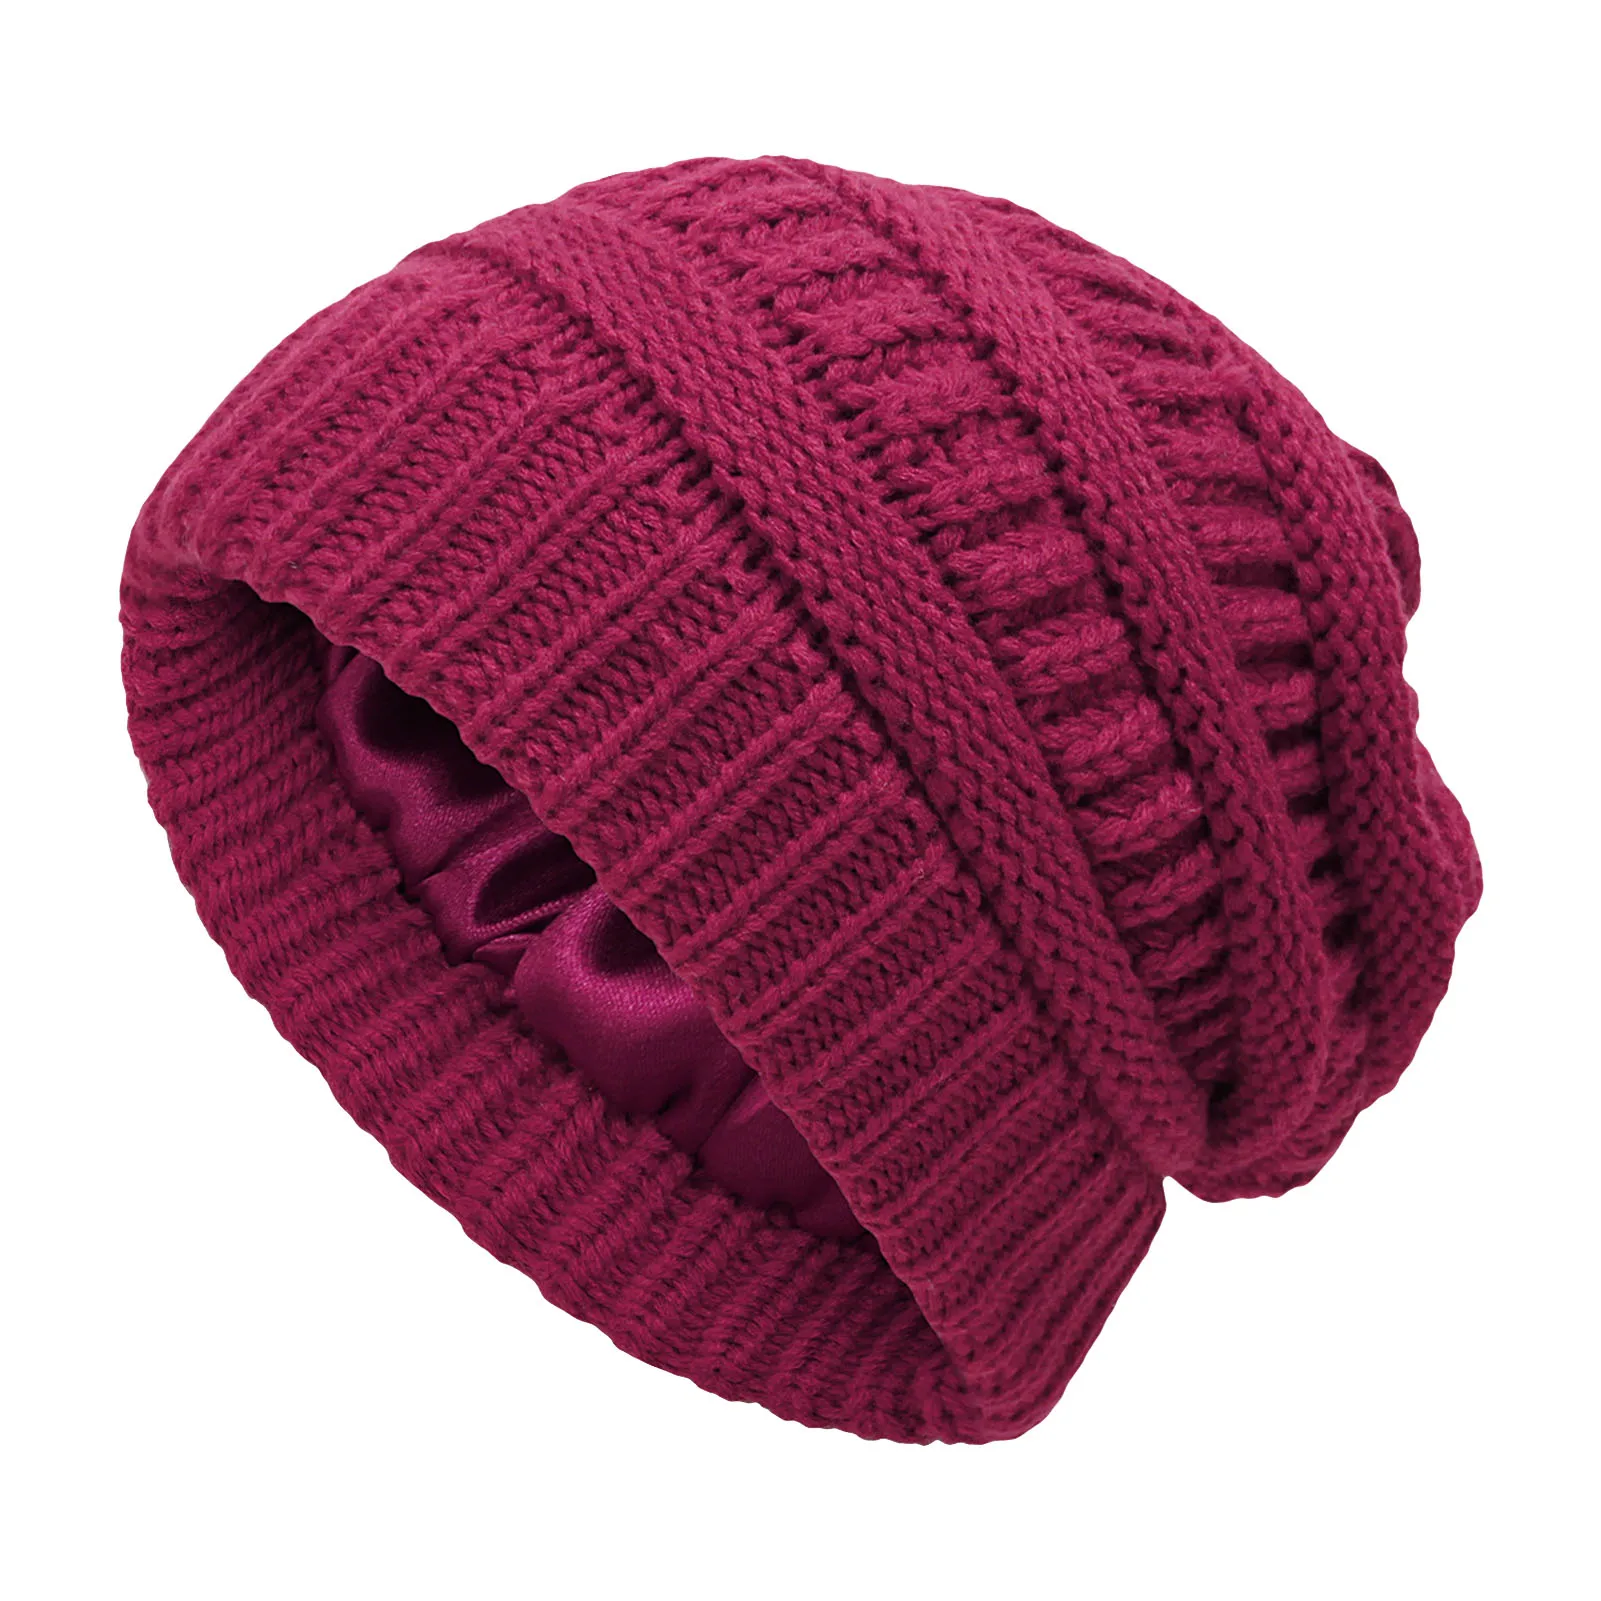 

Thick Warm Winter Beanie Hat Soft Stretch Slouchy Knit Cap For WomenSize Fit Most